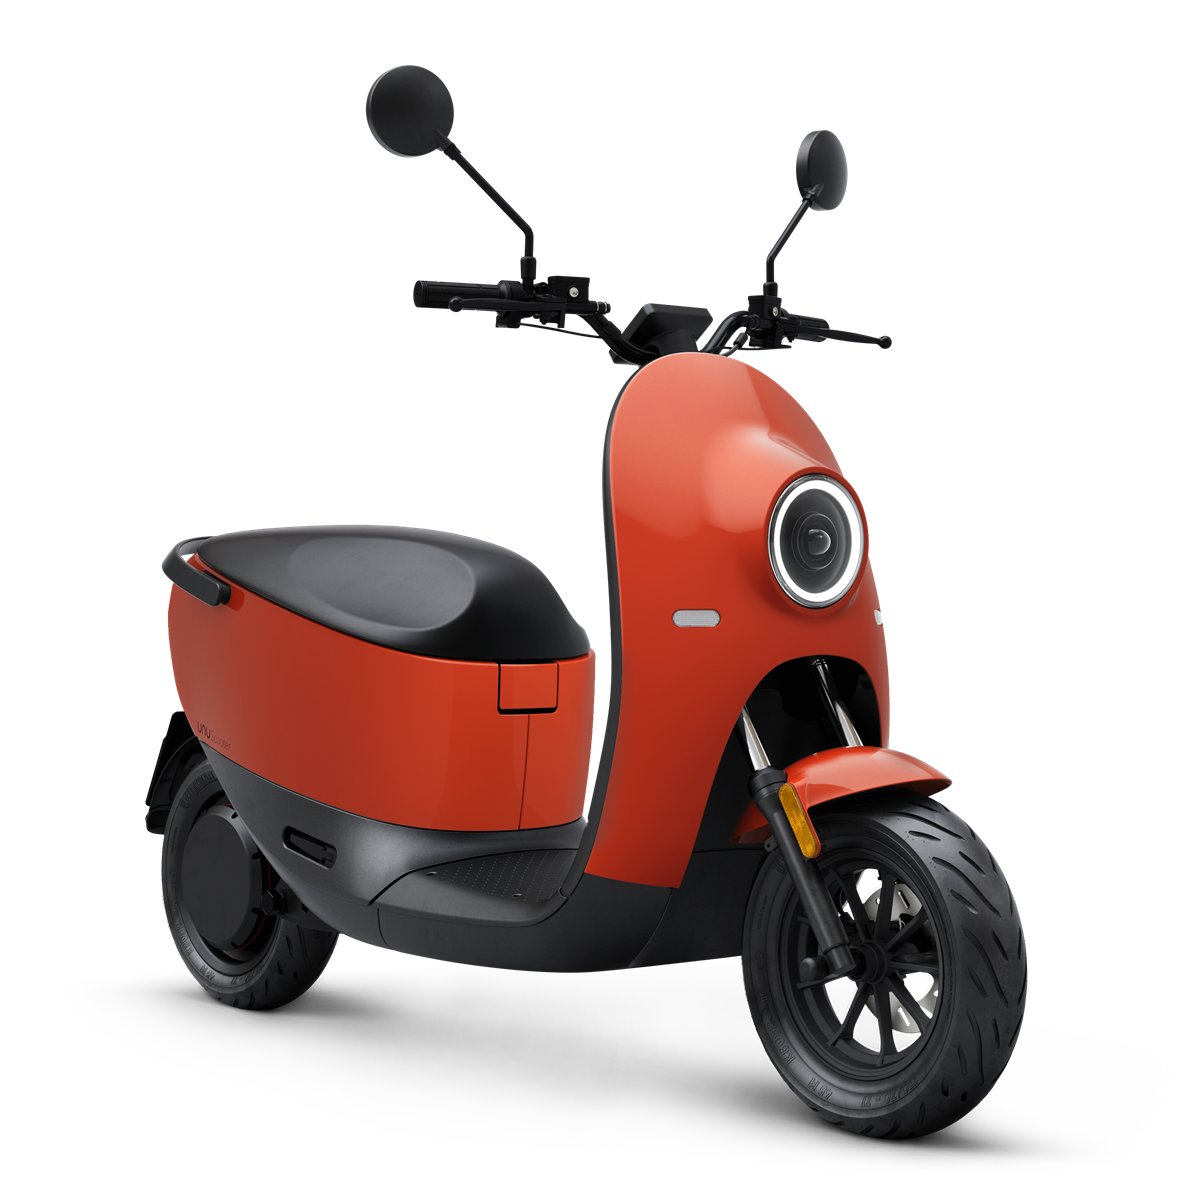 unu Scooter_Red Glossy_ab EUR 2.399